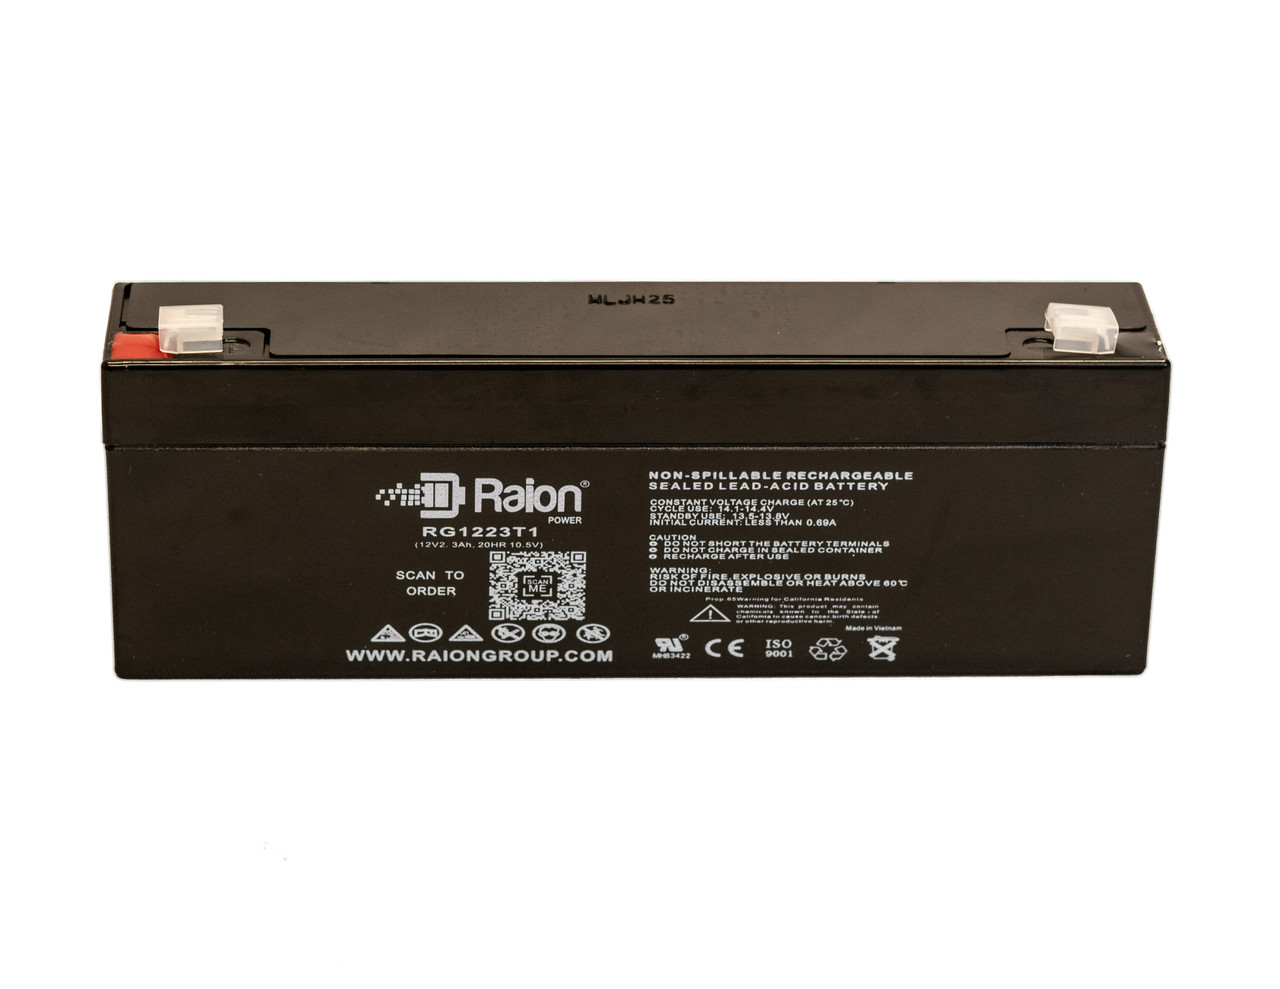 Raion Power 12V 2.3Ah SLA Battery With T1 Terminals For Baxter Healthcare 5B Infusion Pump